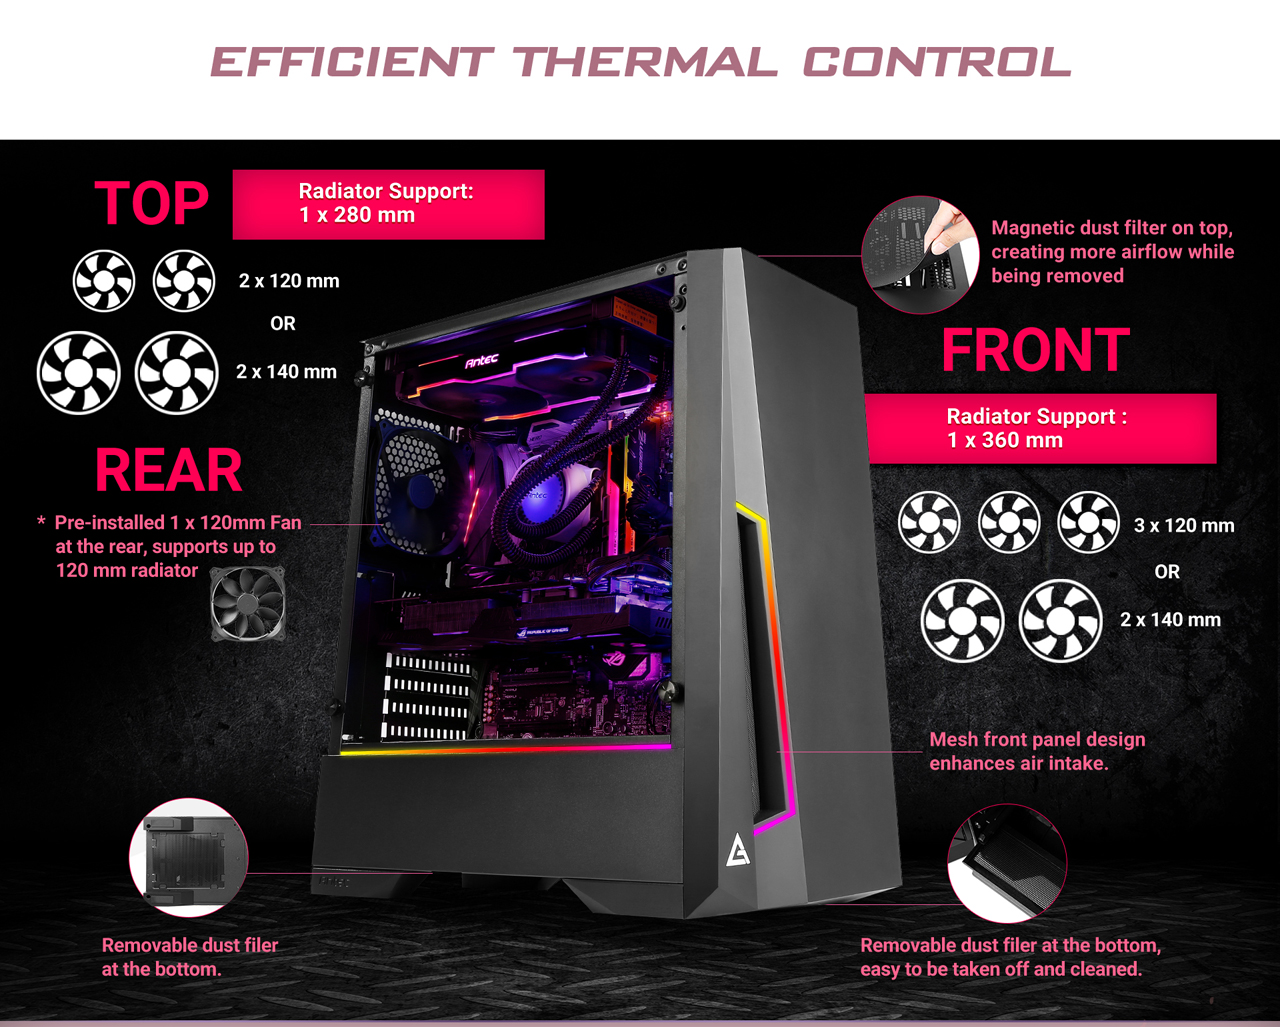 Efficient Thermal Control